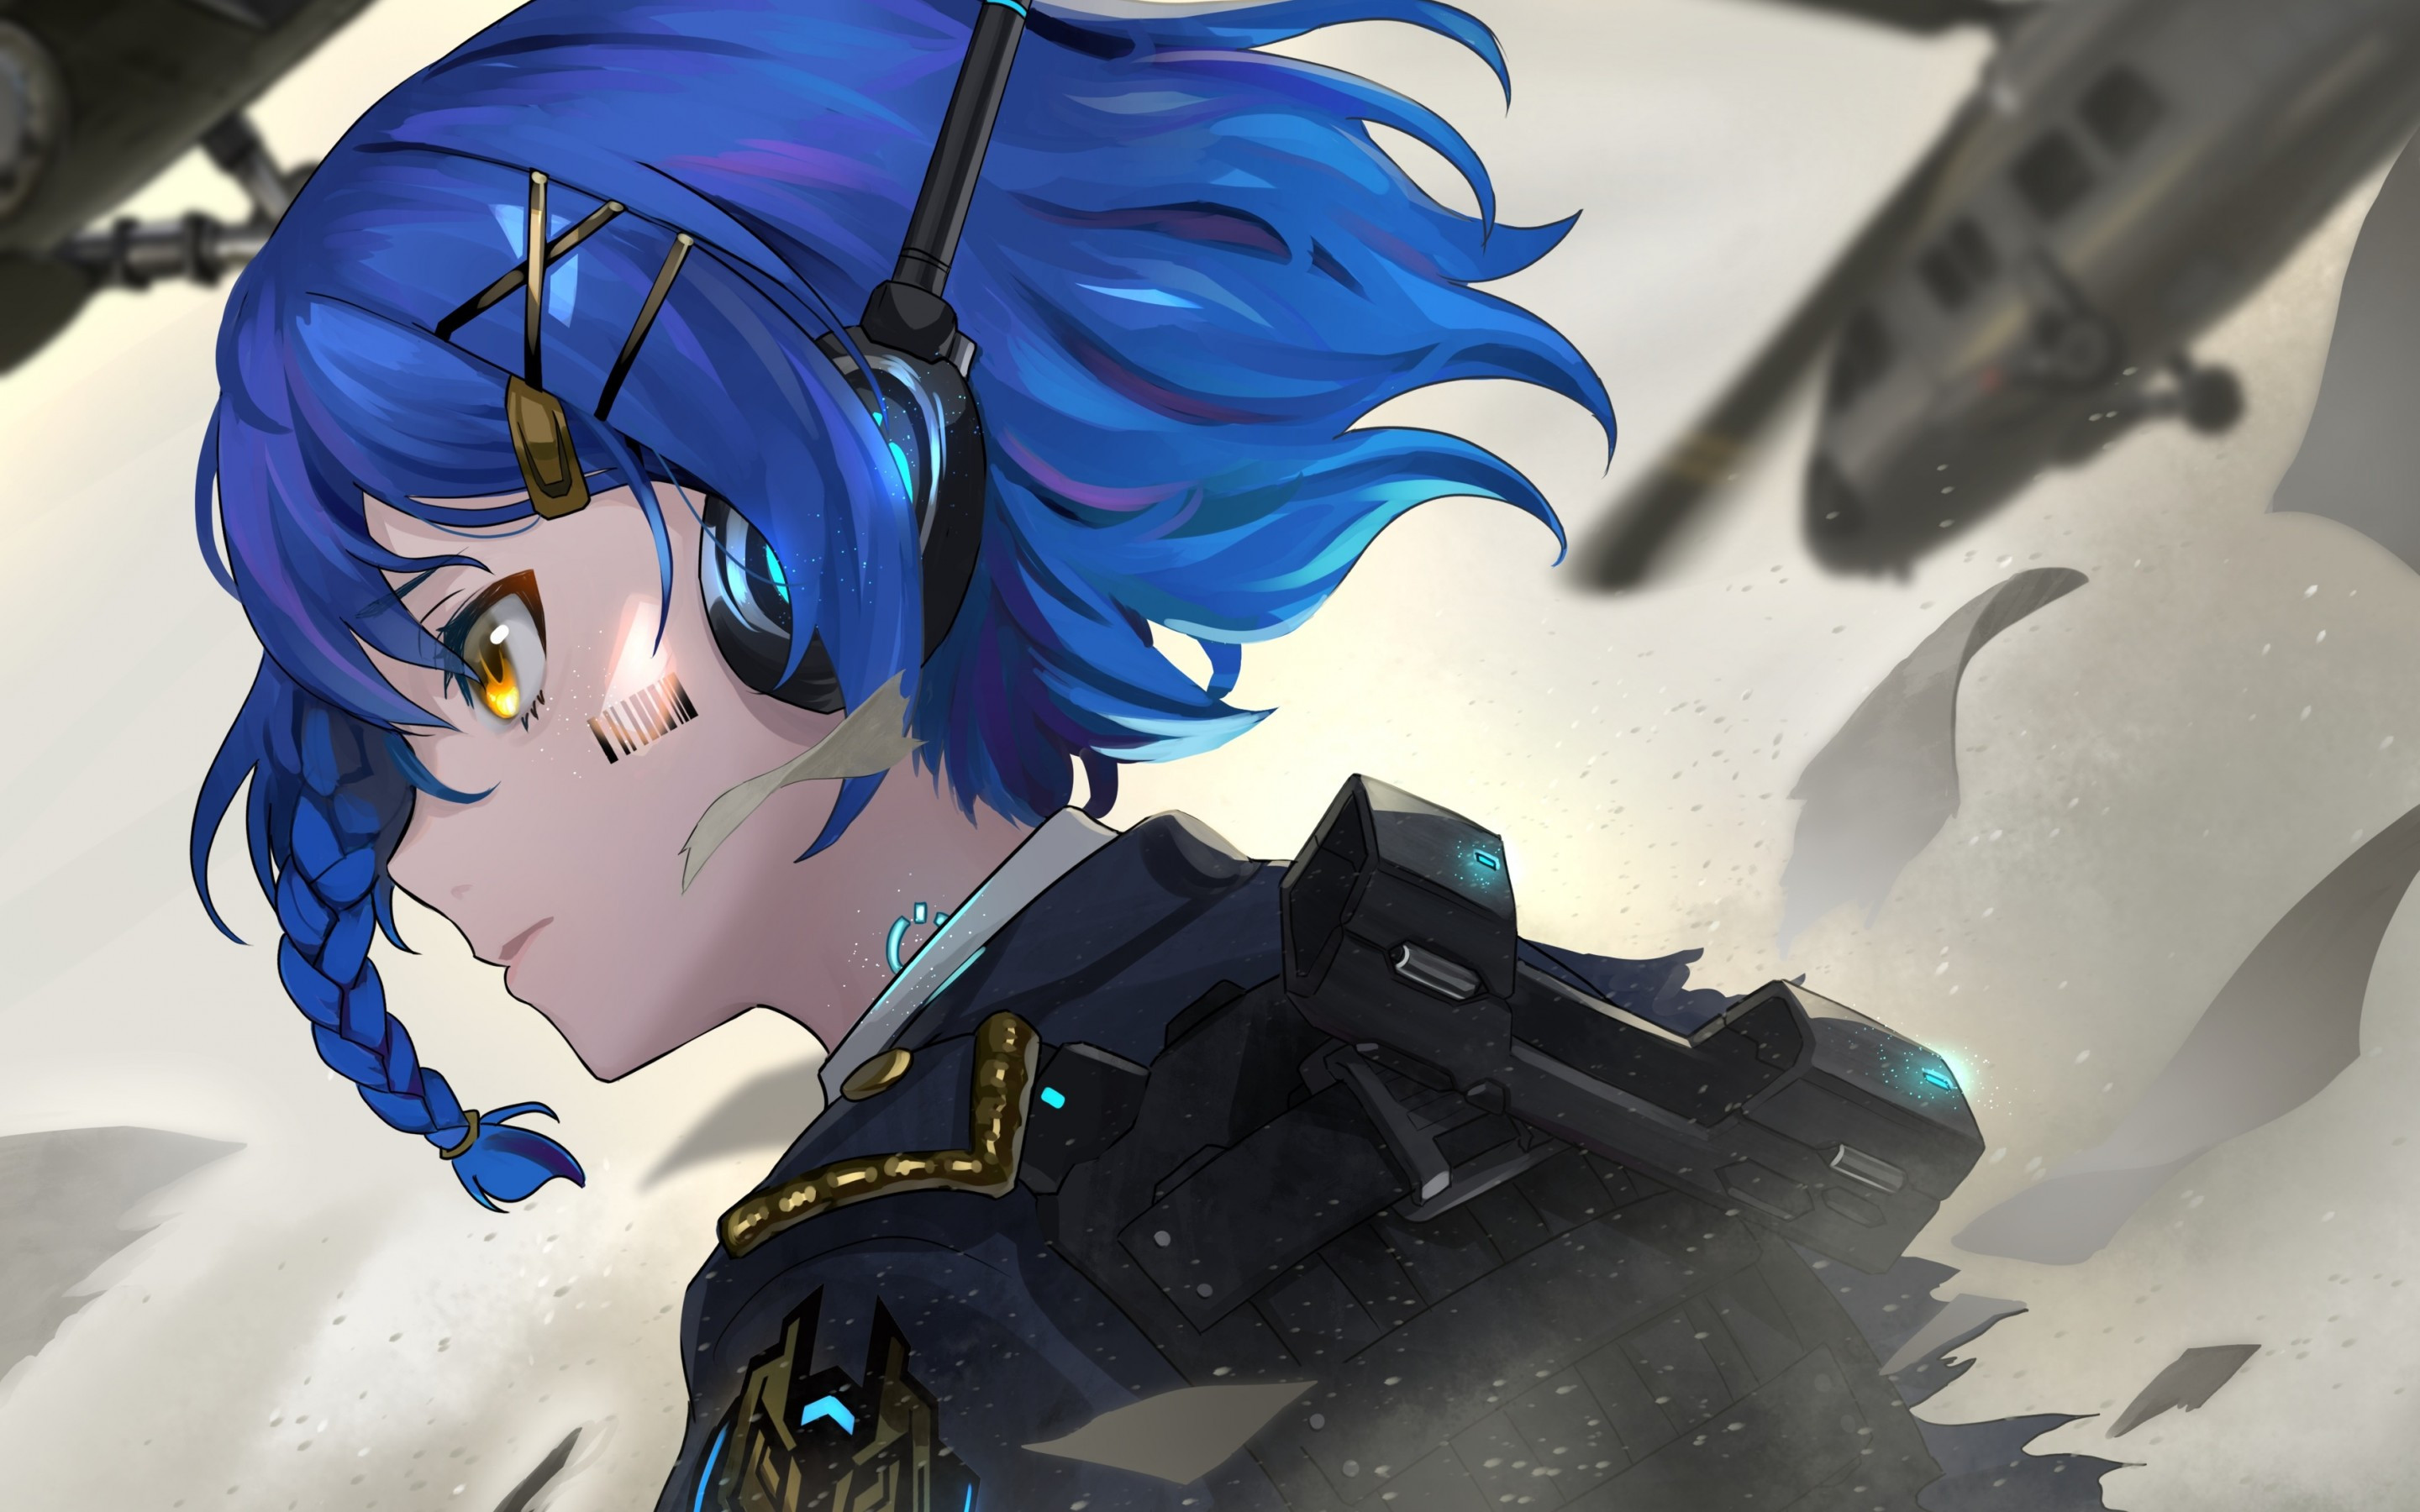 Download 2880x1800 Blue Hair, Anime Tech Girl, Profile View, Braid, Uniform, War, Helicopter, Aircraft Wallpaper for MacBook Pro 15 inch